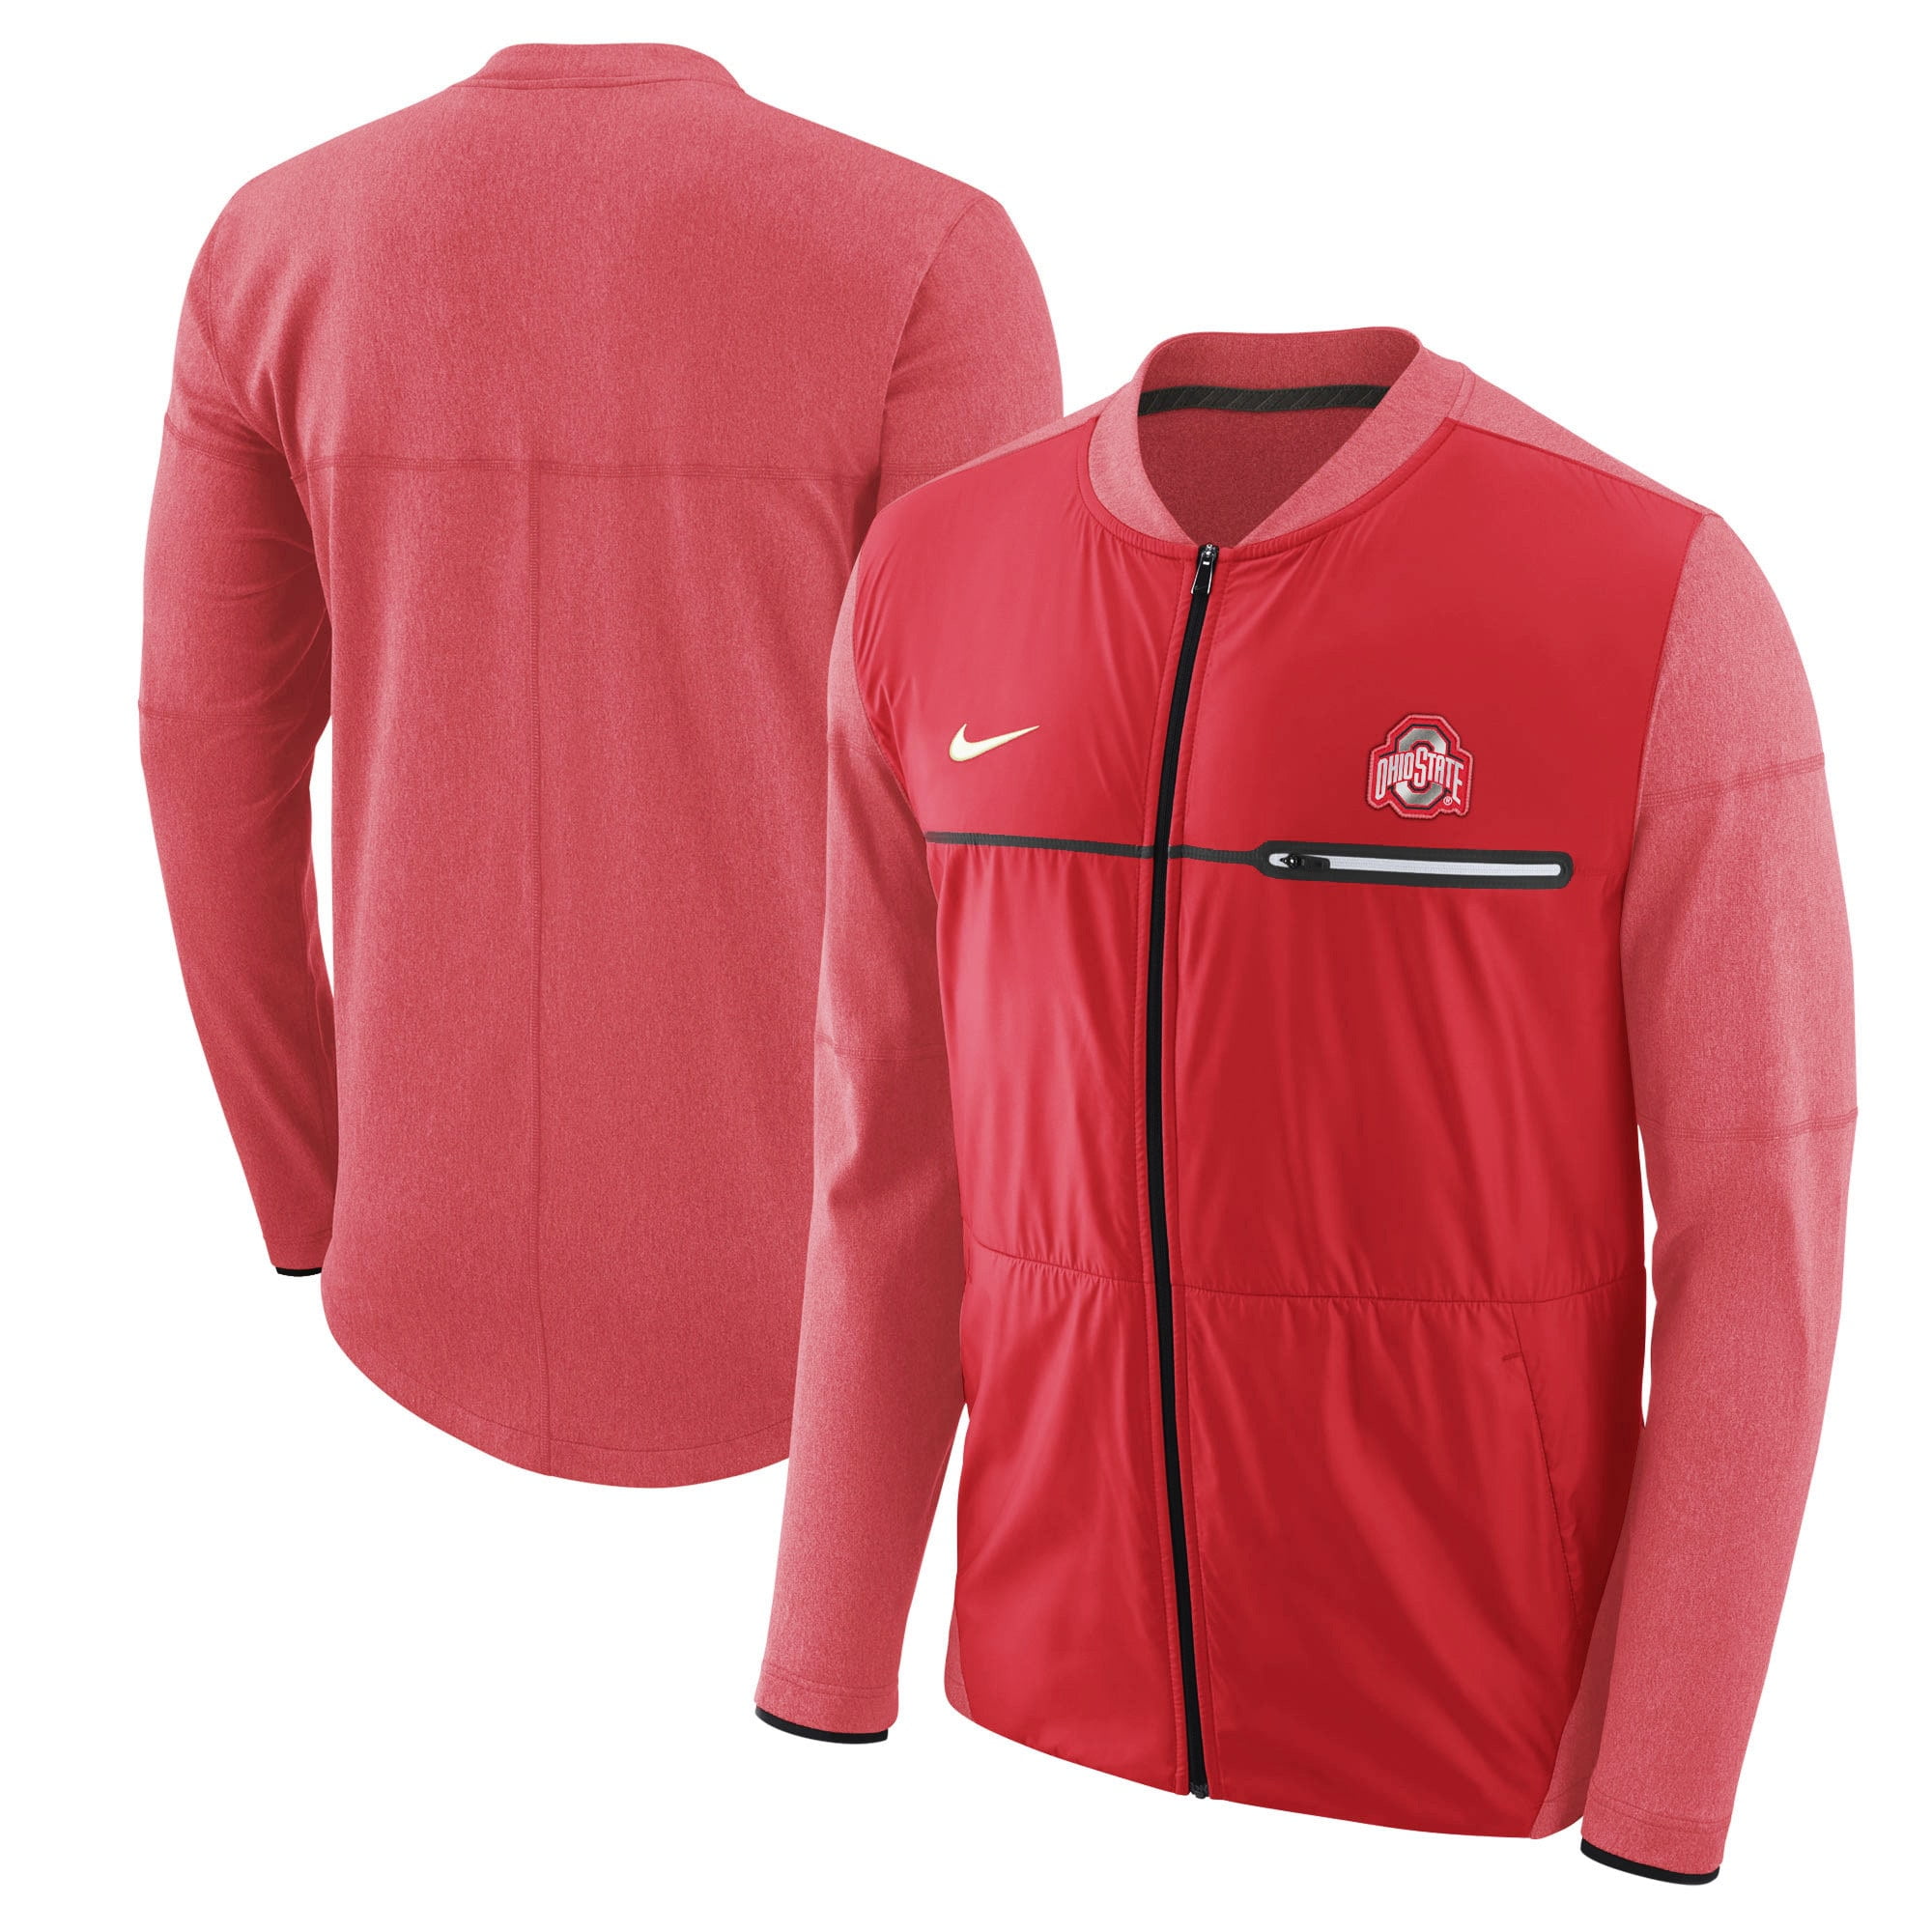 Nike Sideline Player's Jacket – Brother Rice Bookstore